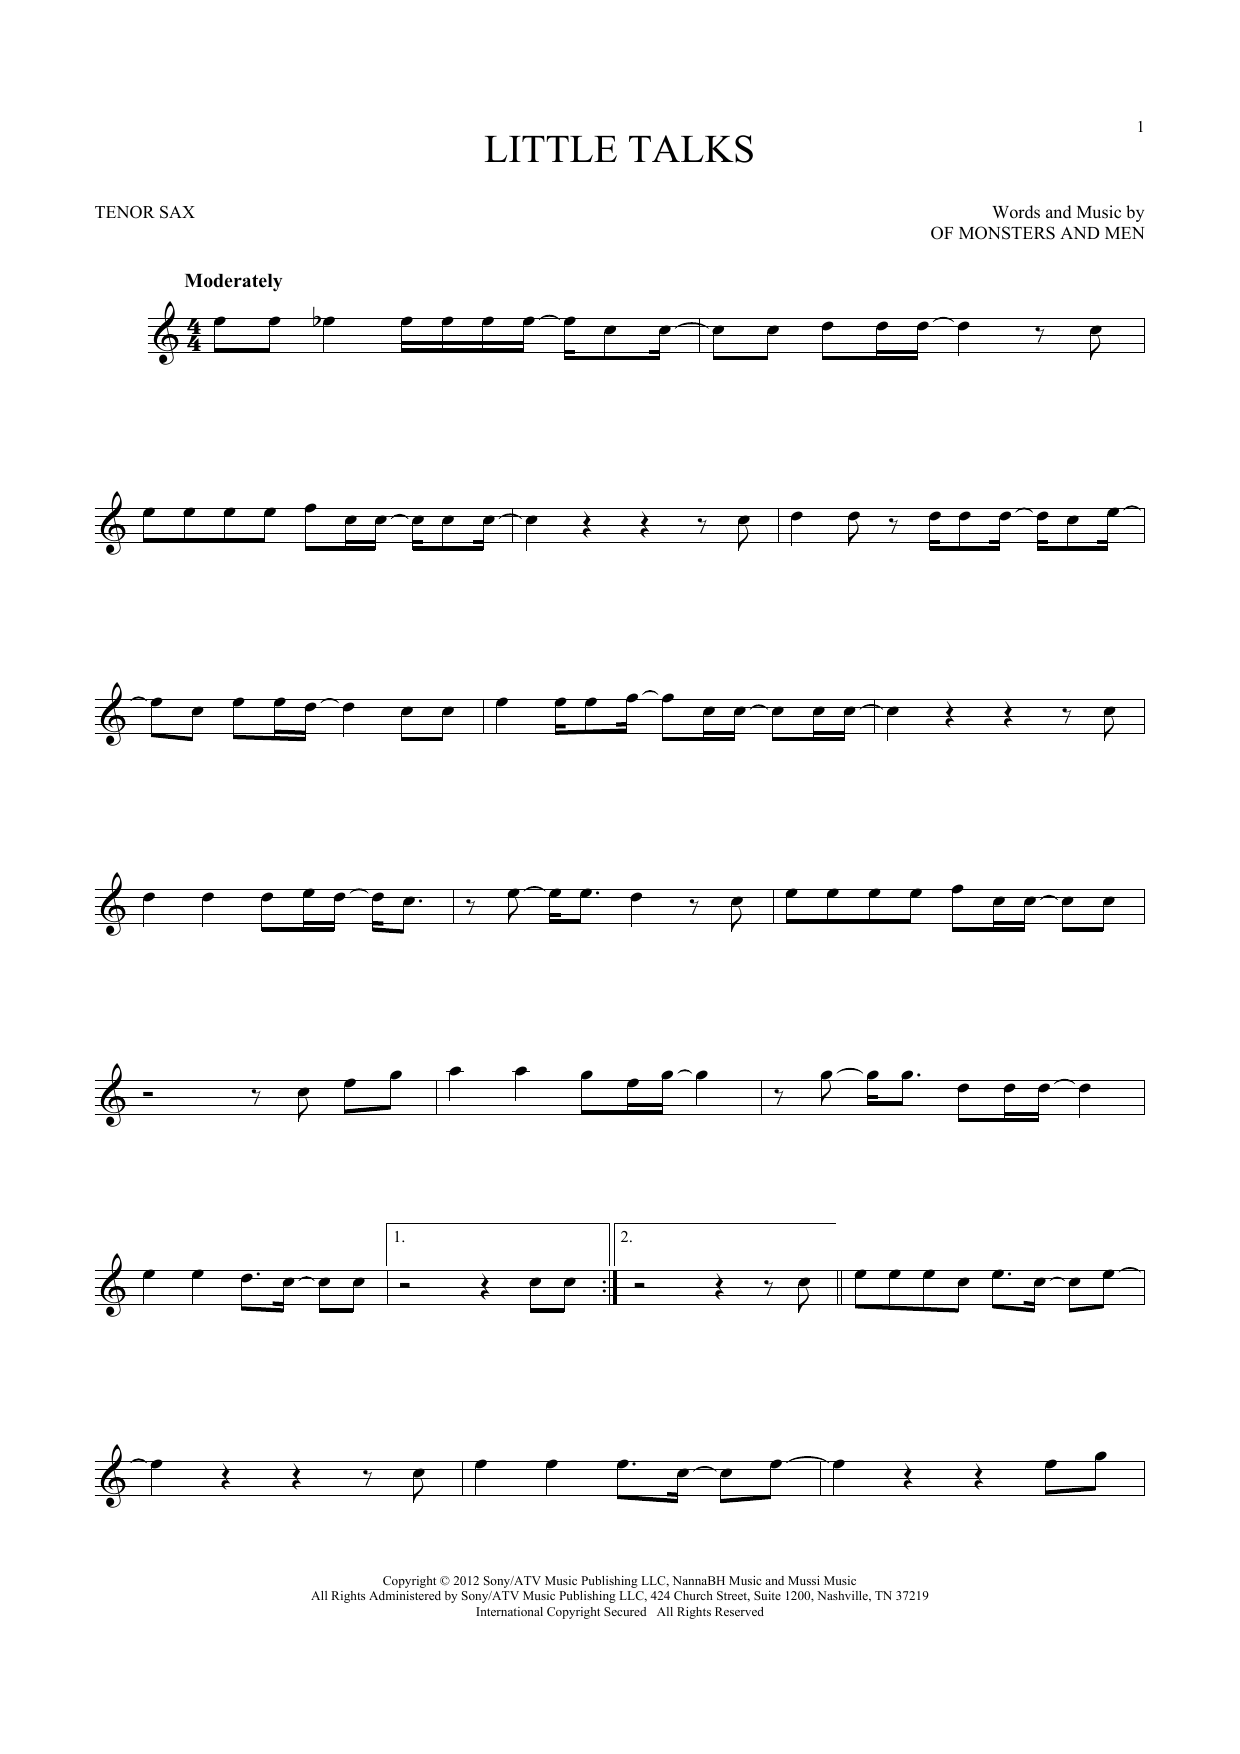 Download Of Monsters And Men Little Talks Sheet Music